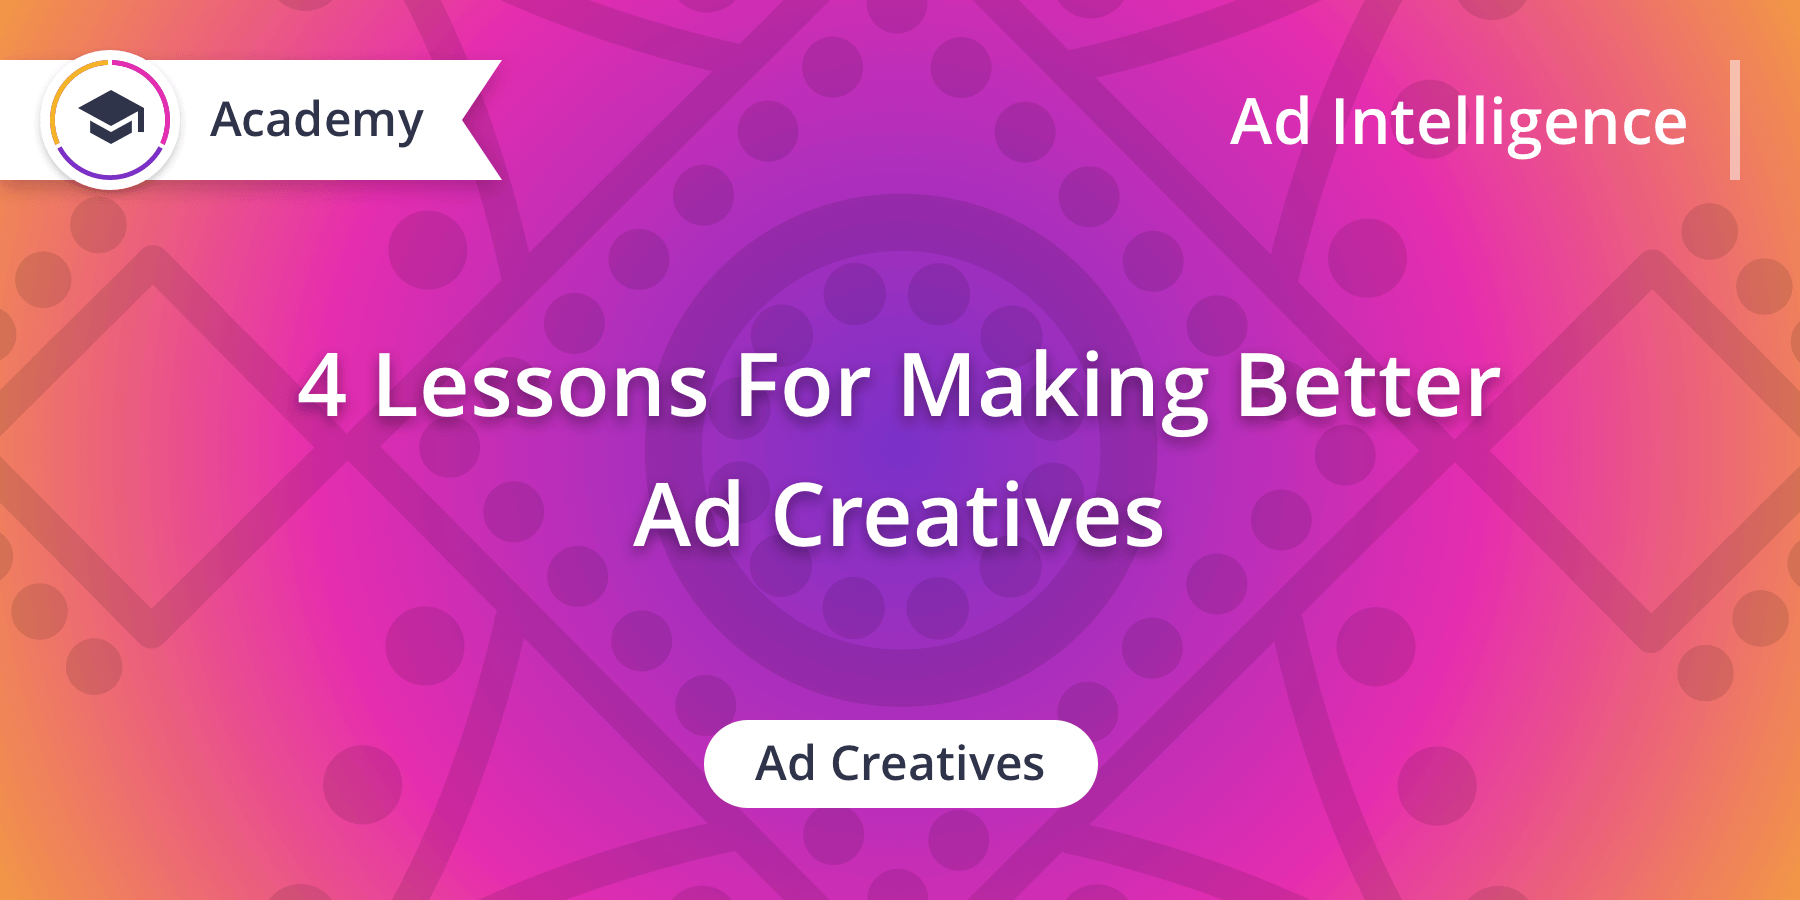 4 Lessons for Making Better Ad Creatives